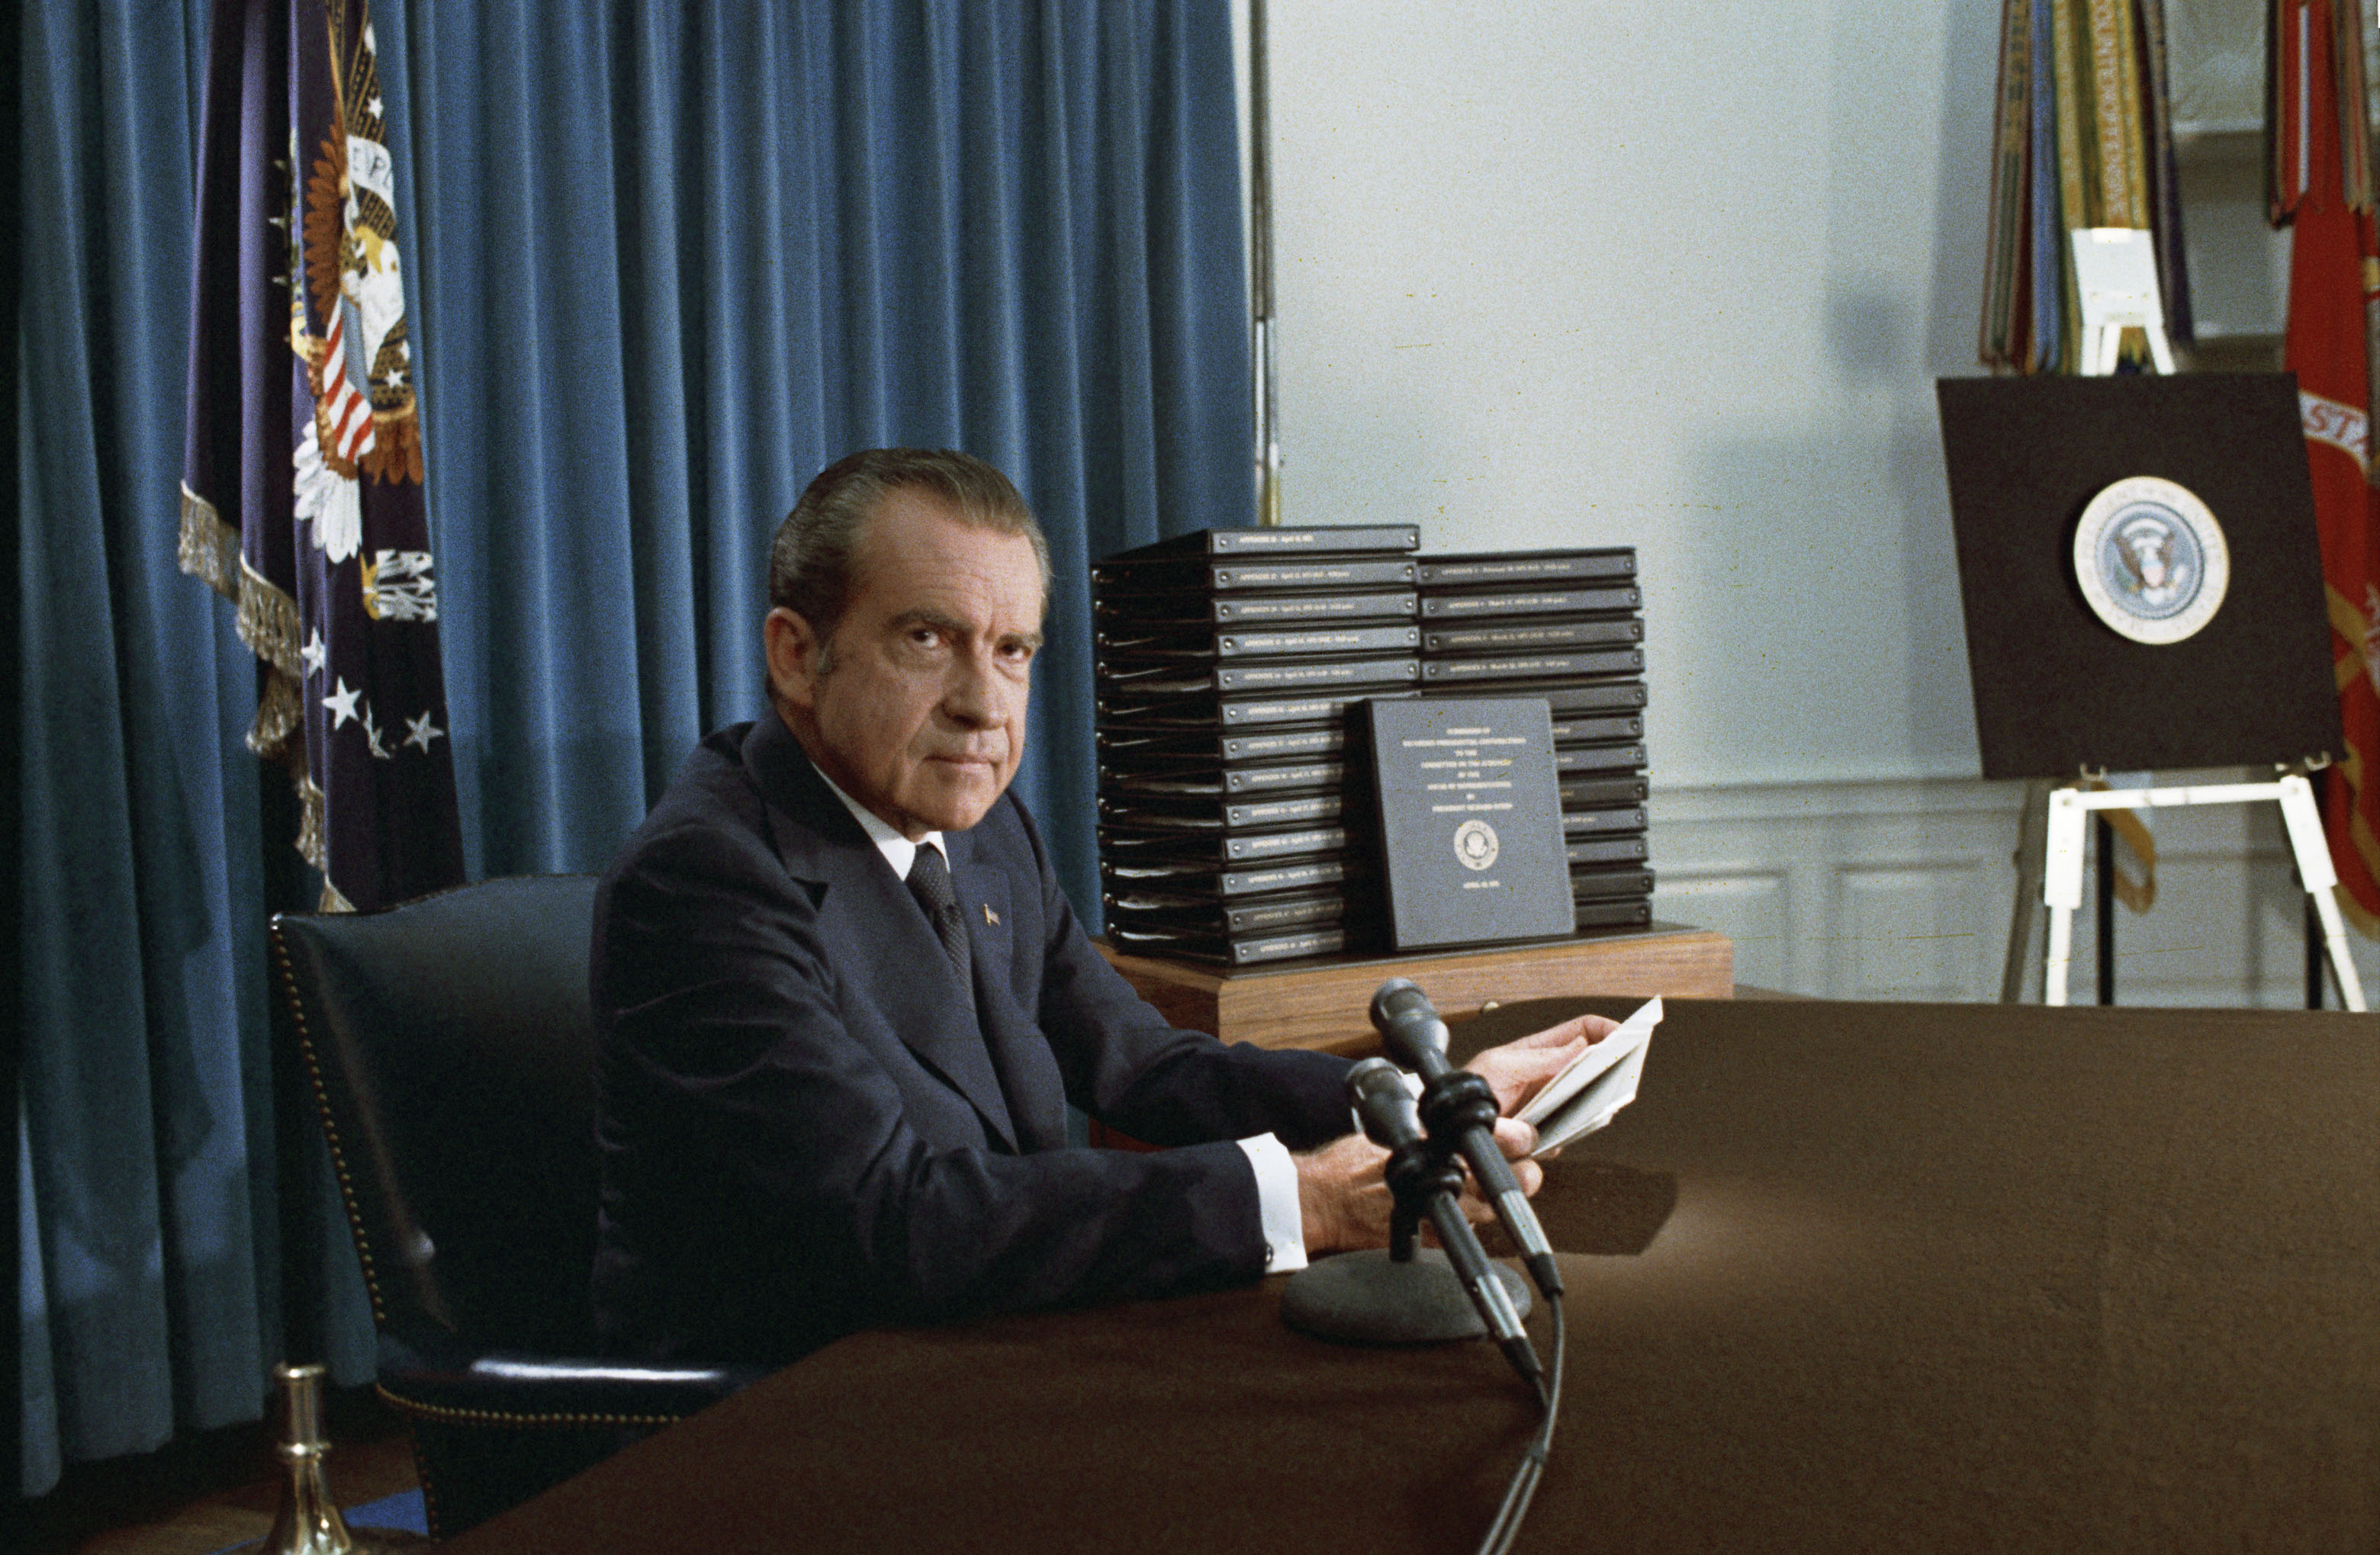 What was Watergate?